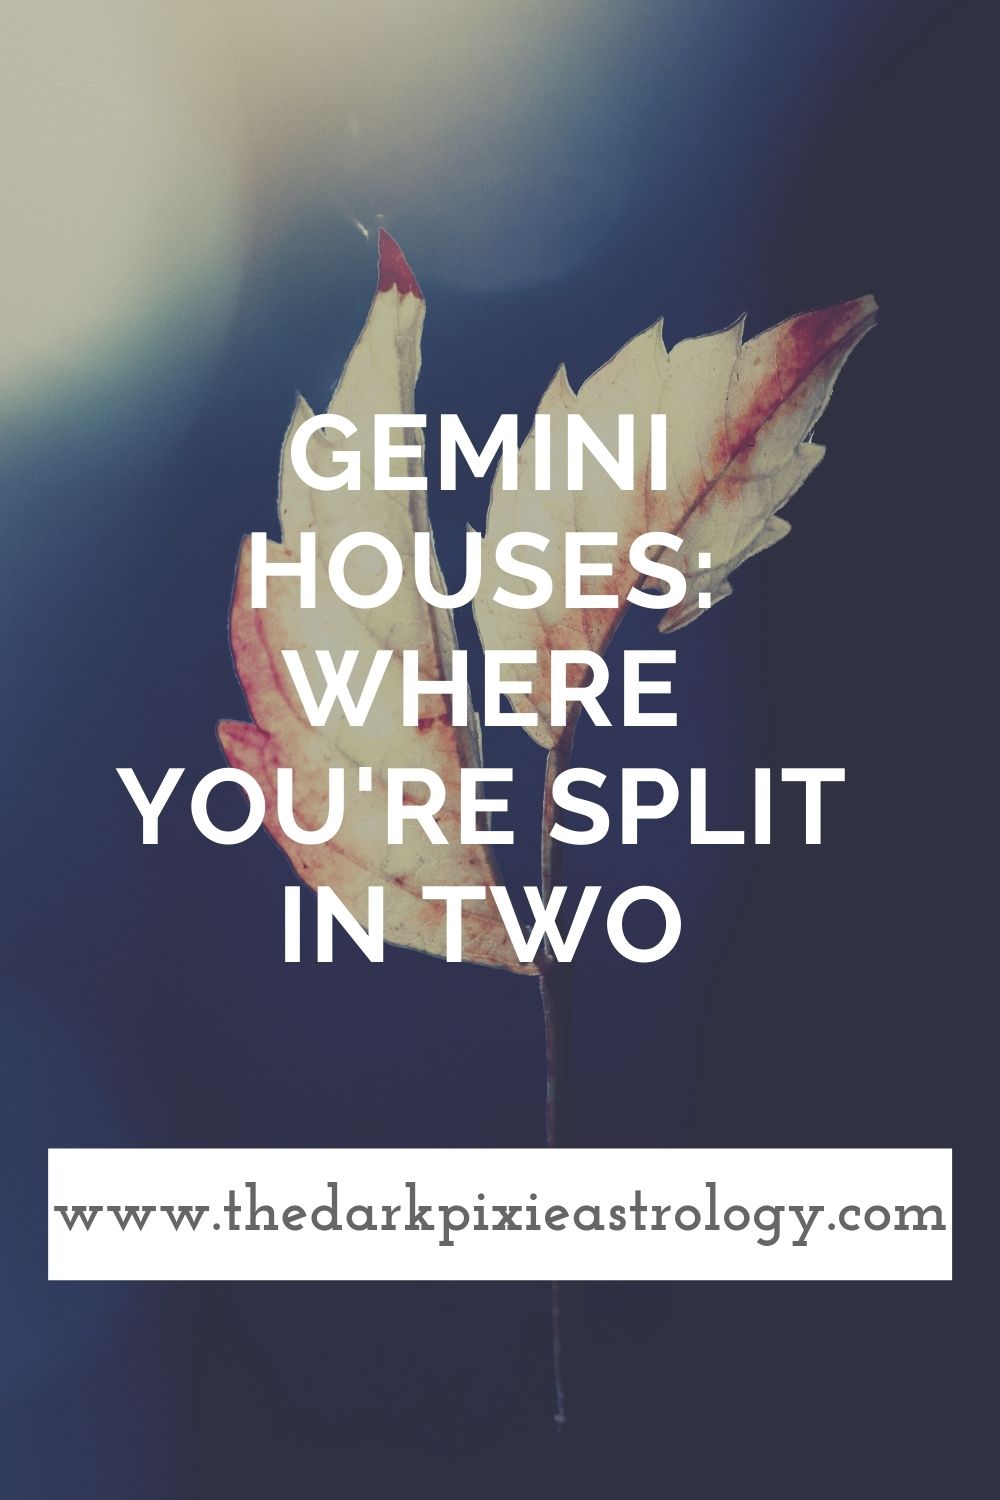 Gemini Houses: Where You're Split in Two - The Dark Pixie Astrology